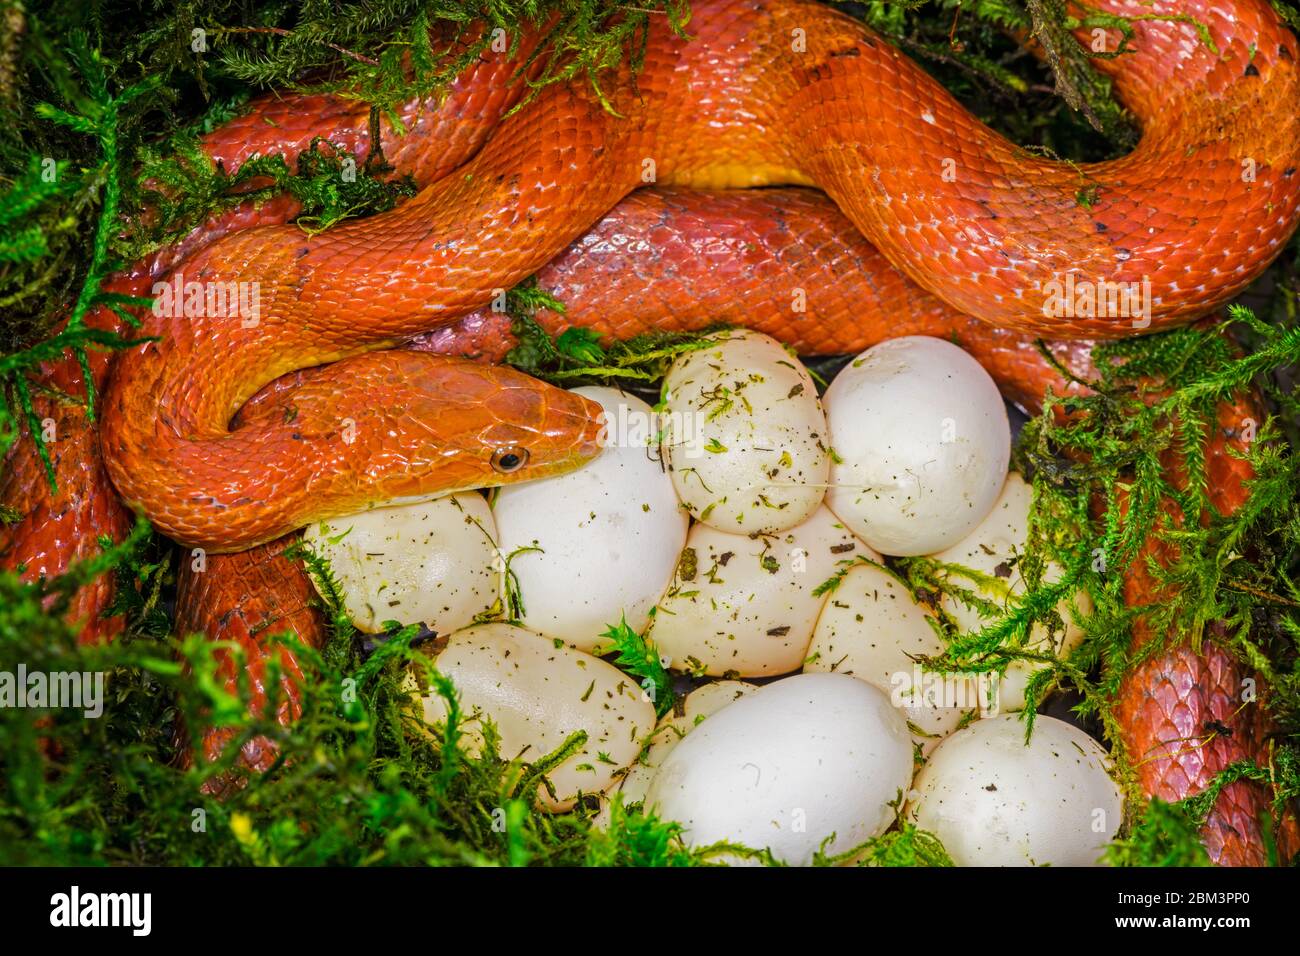 corn snake (Pantherophis guttatus), female with recently laid eggs, captive, native to Eastern United States, 'diffused morph' Stock Photo